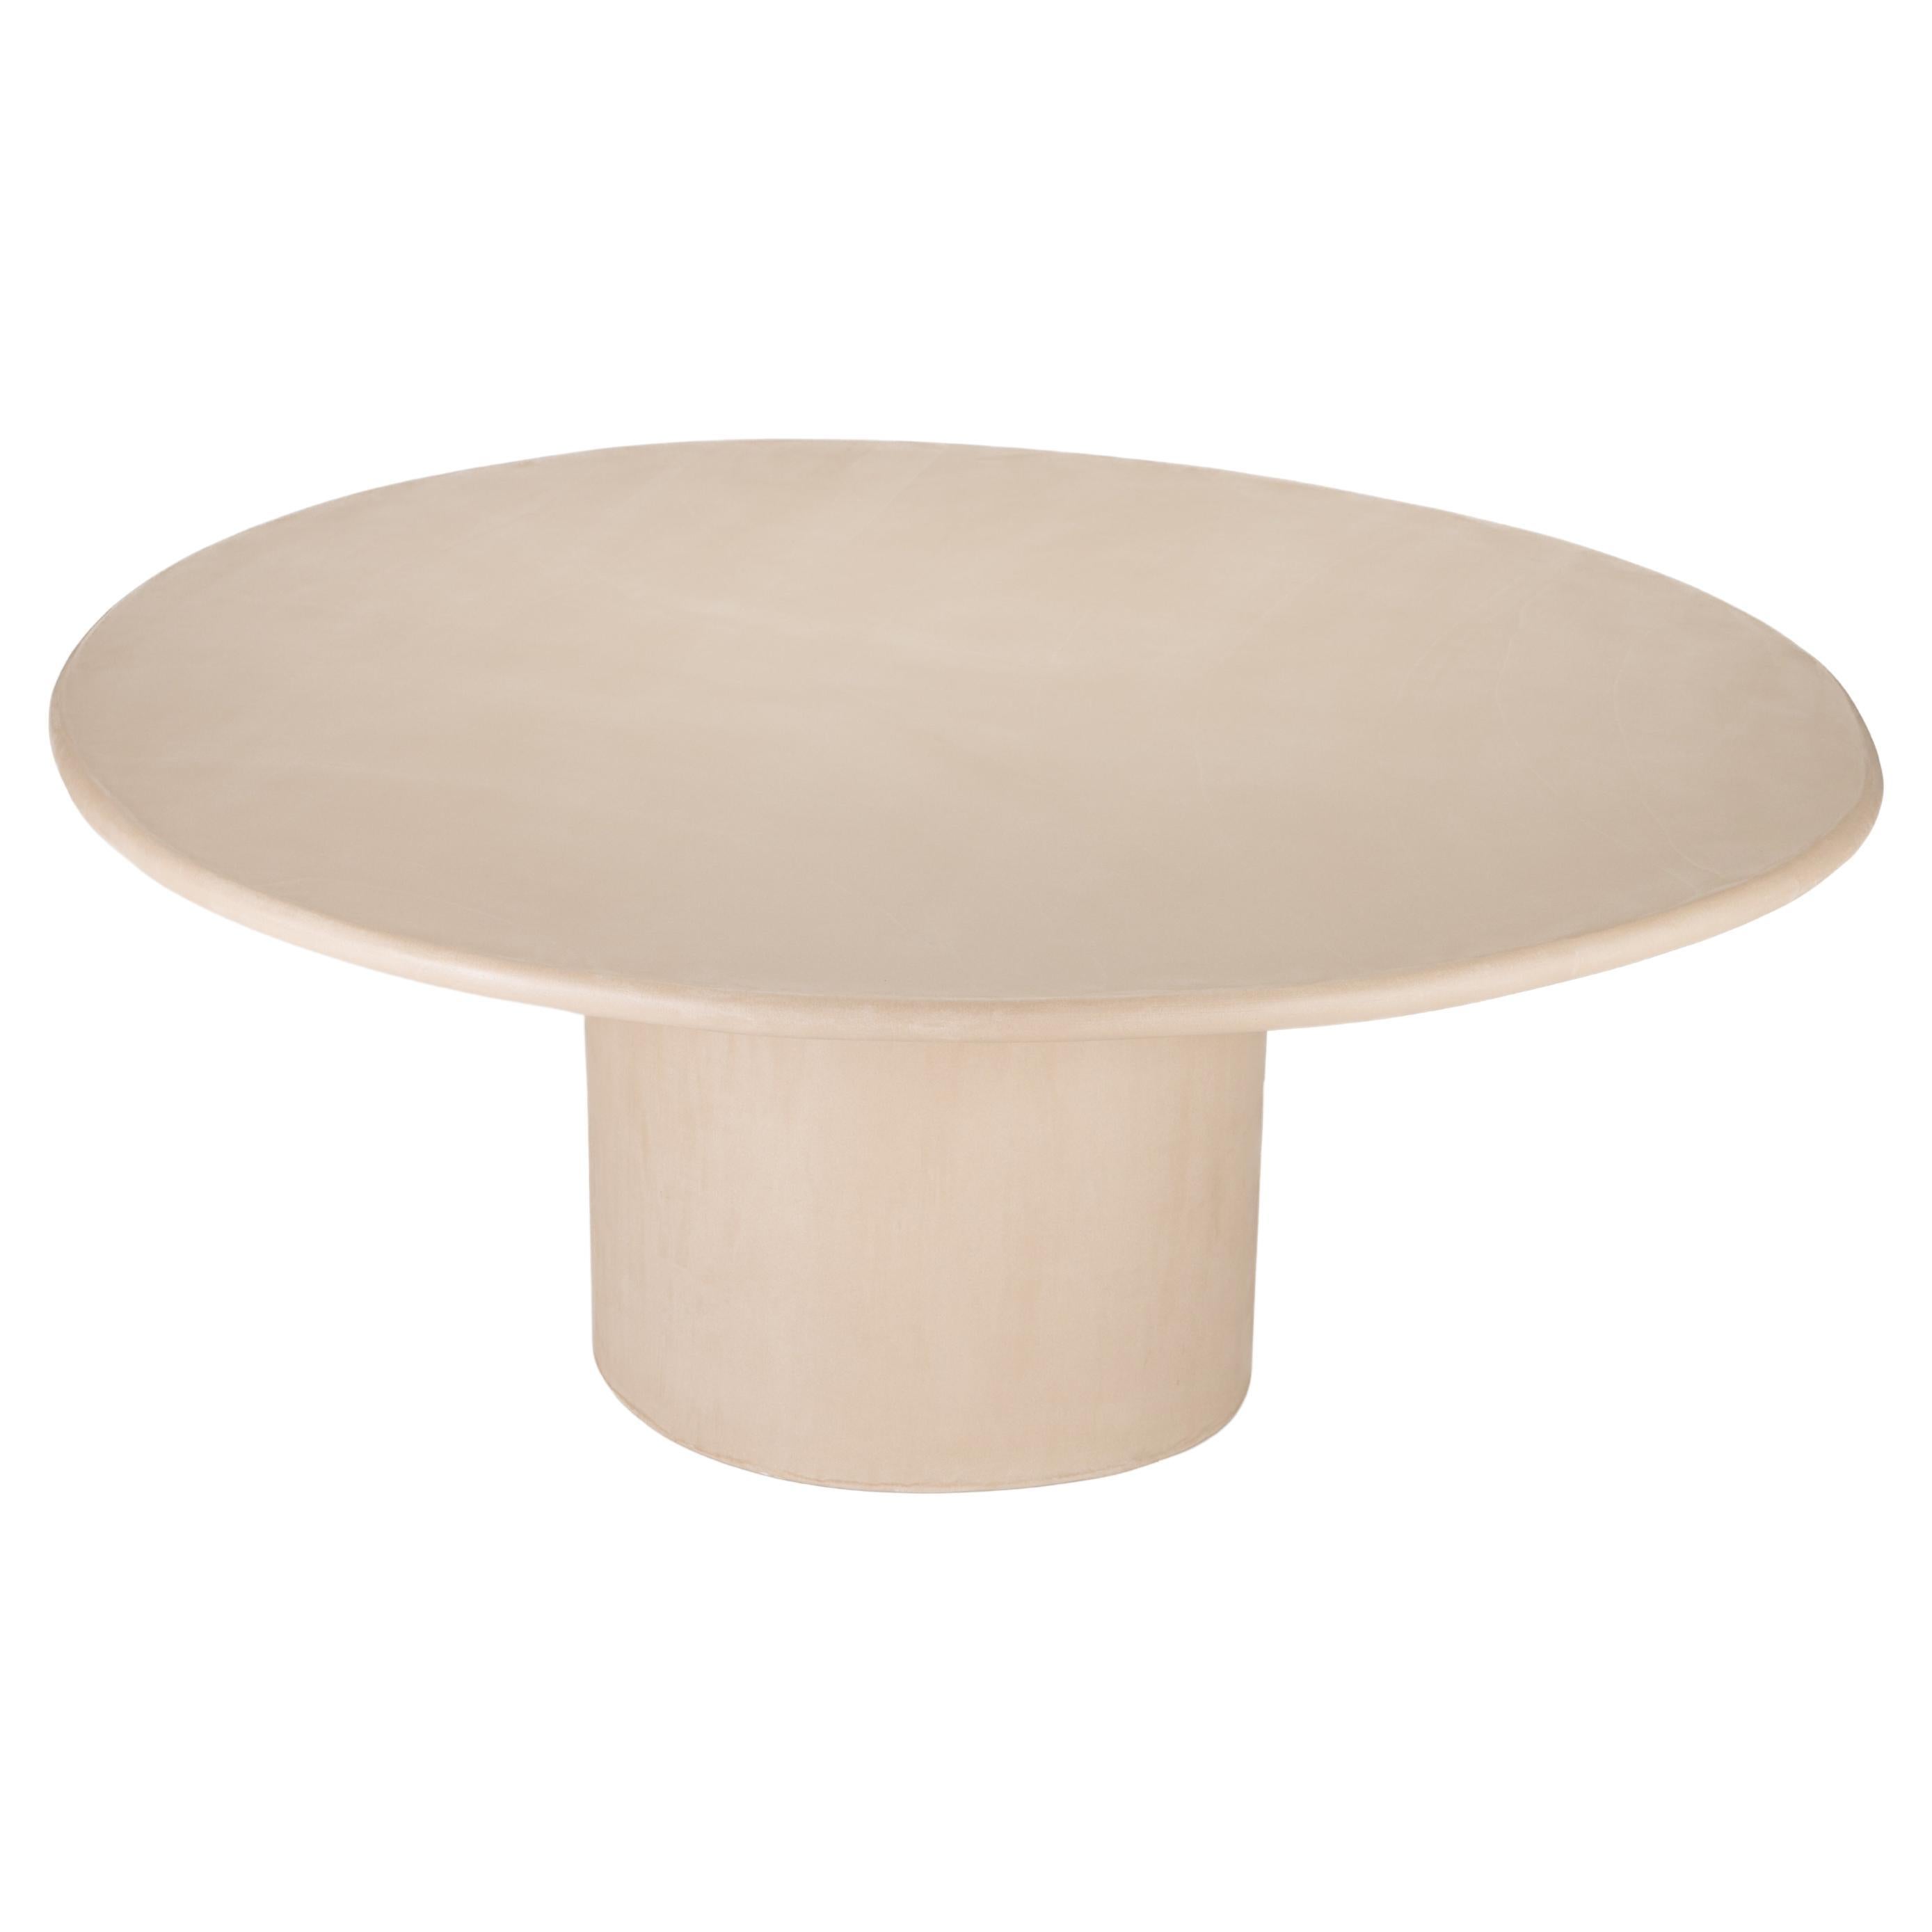 Organic Shaped Natural Plaster Dining Table "Sami" 170 by Isabelle Beaumont